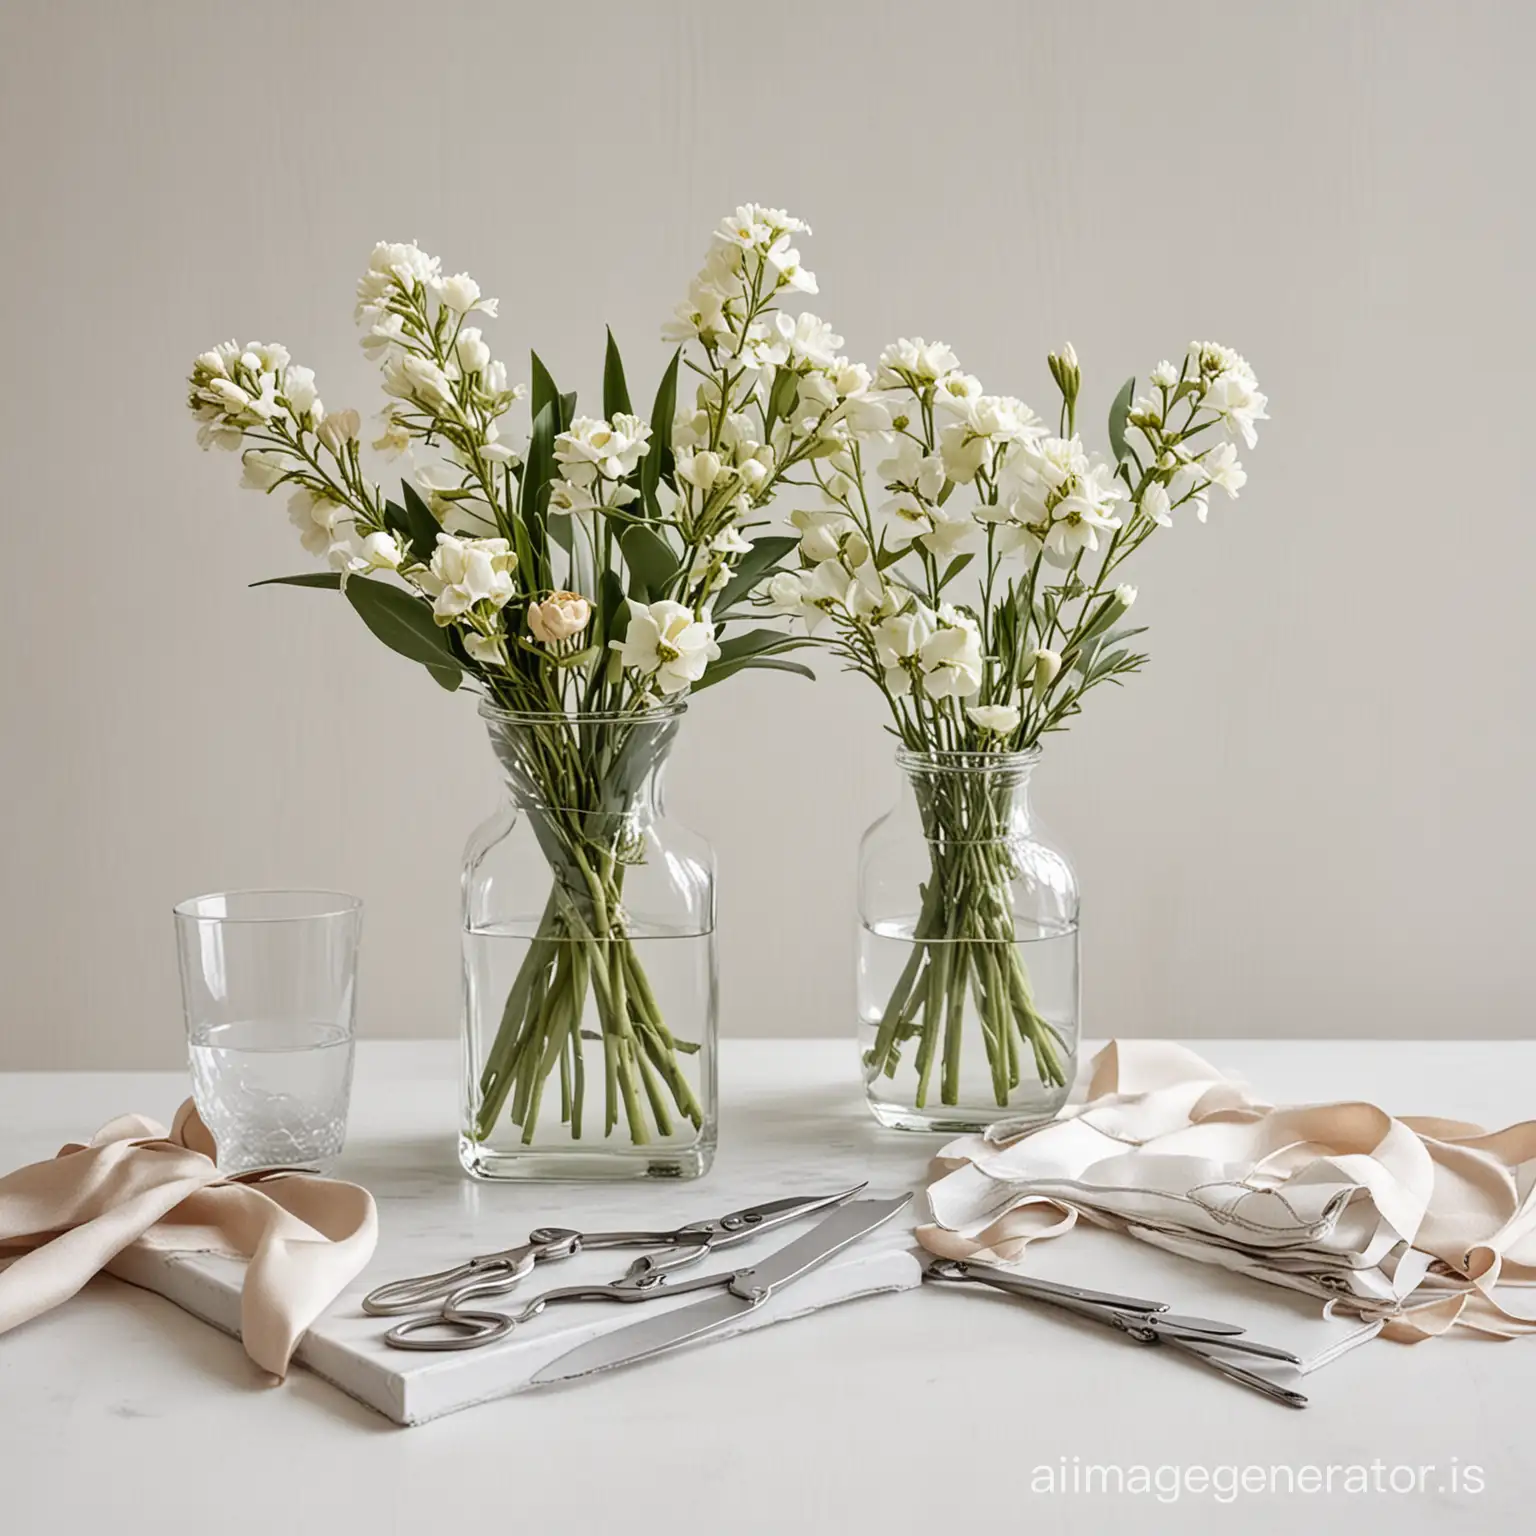 realistic image of a clean, white counter holding craft supplies such as scissors, ribbon, floral shears and flower stems, along with square clear glass vases of high quality